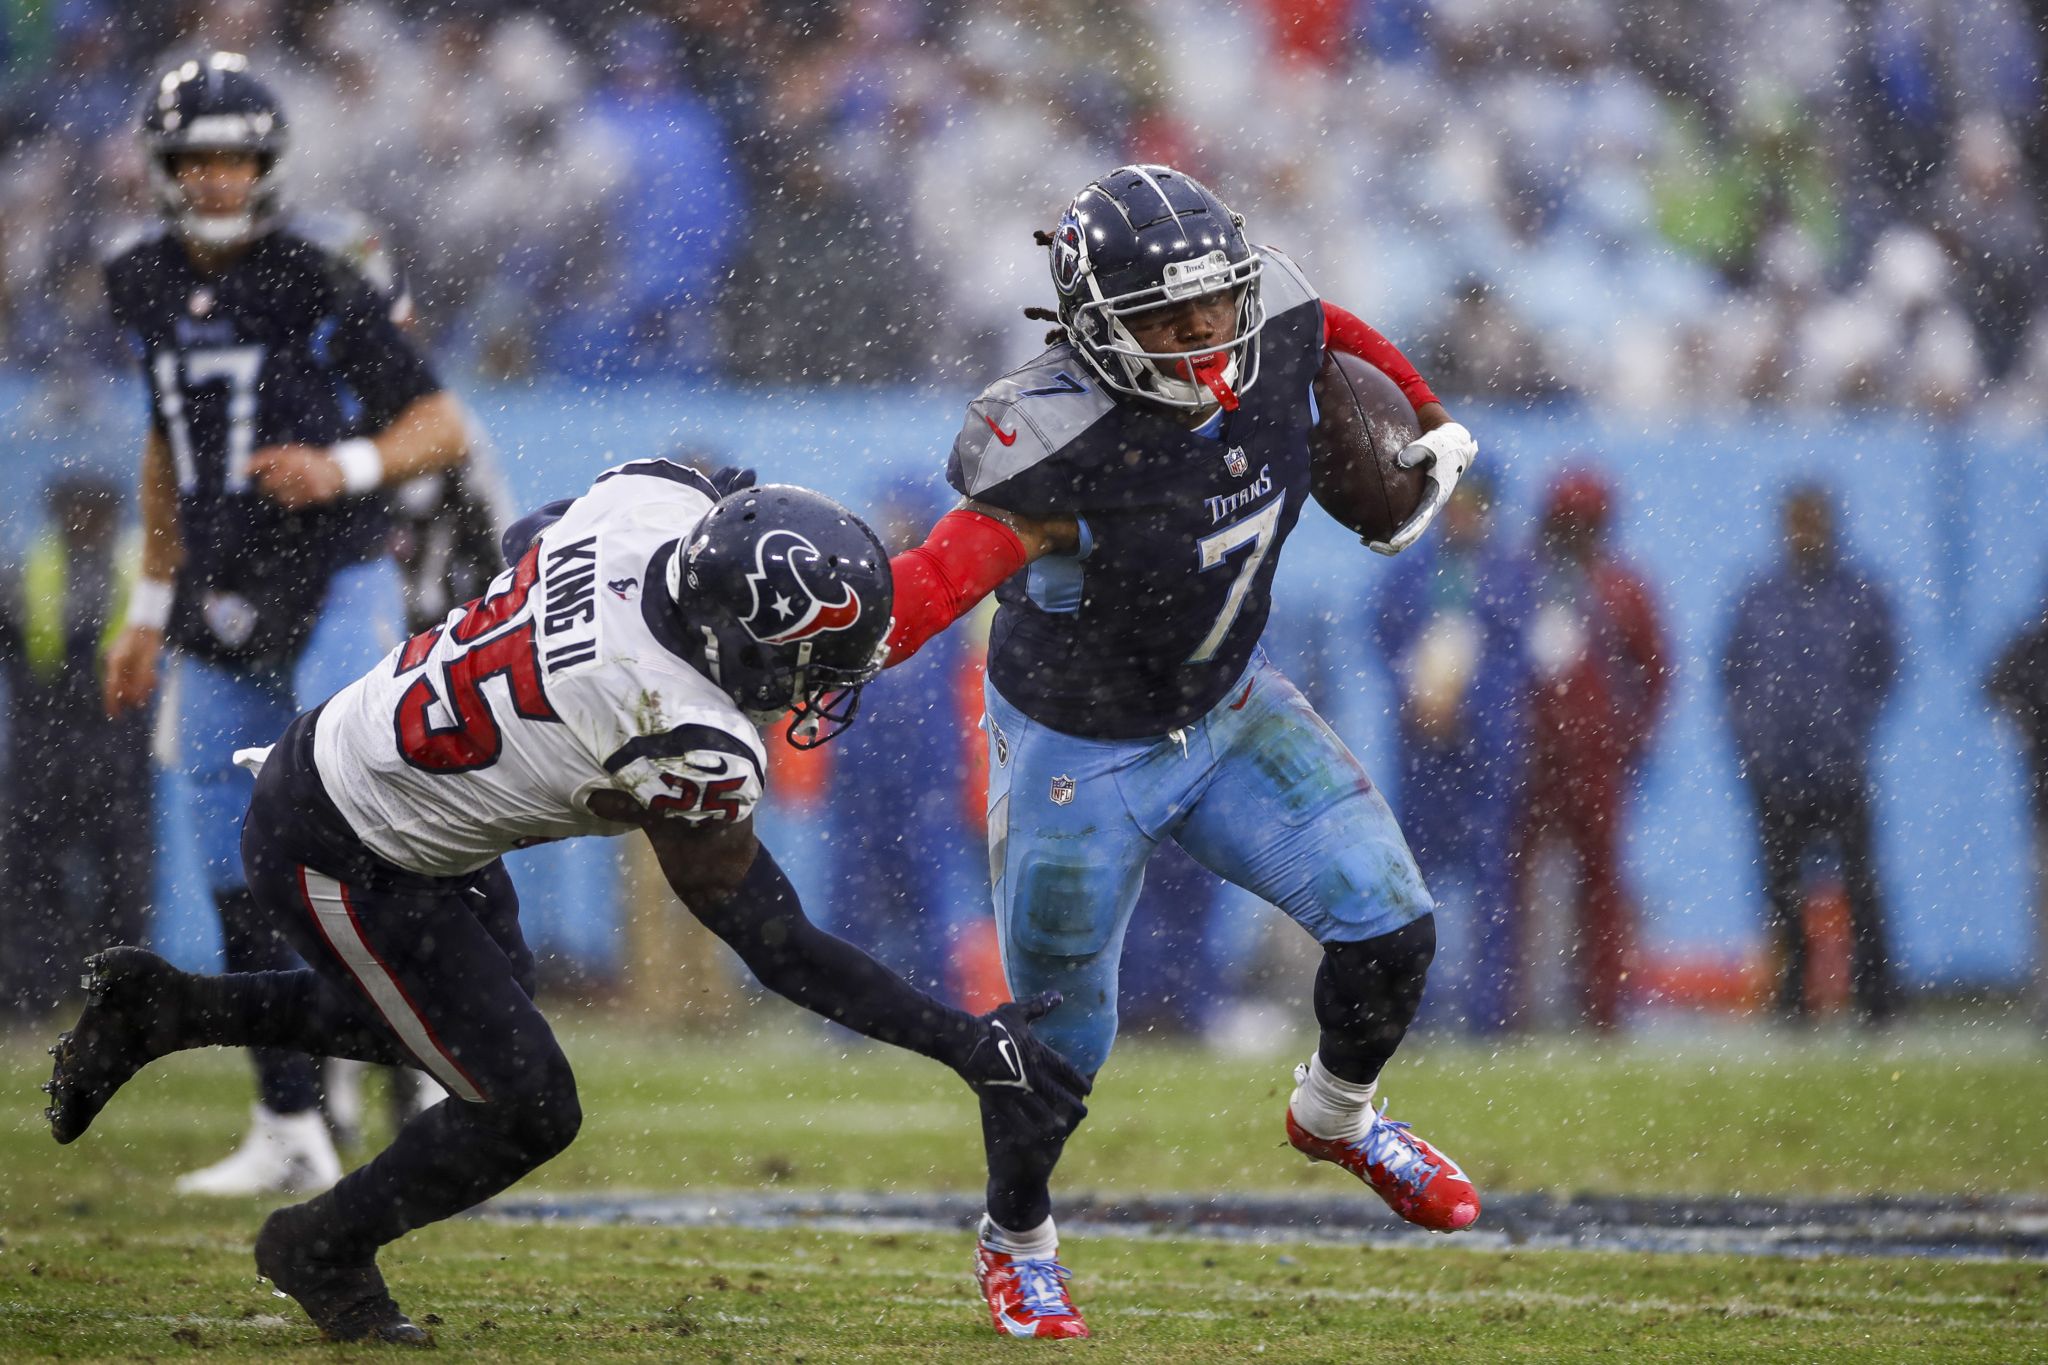 Titans vs. Texans How to watch and stream online